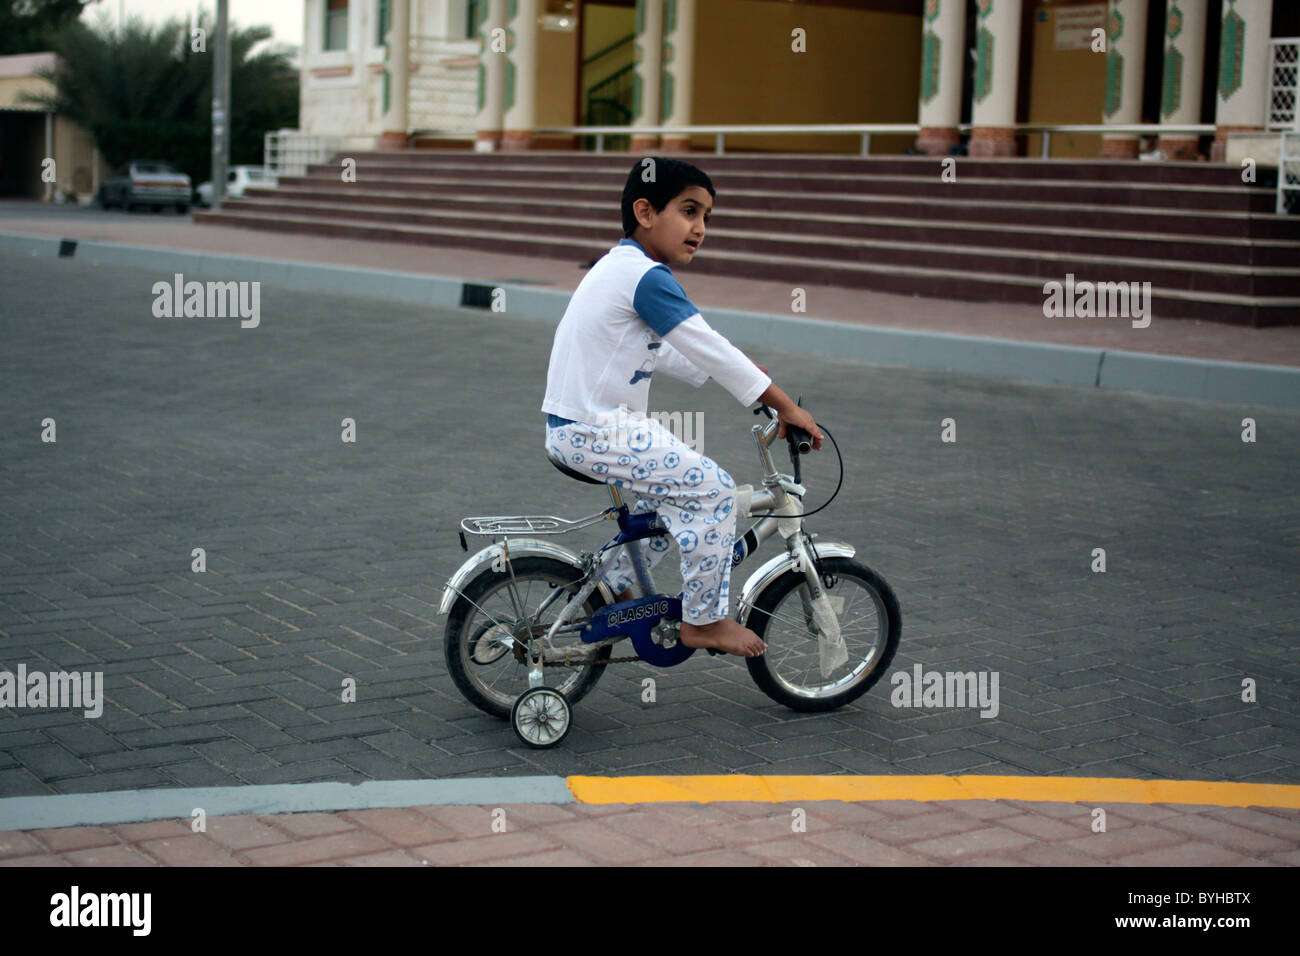 Boy on a bicycle with stabilisers in the UAE Stock Photo